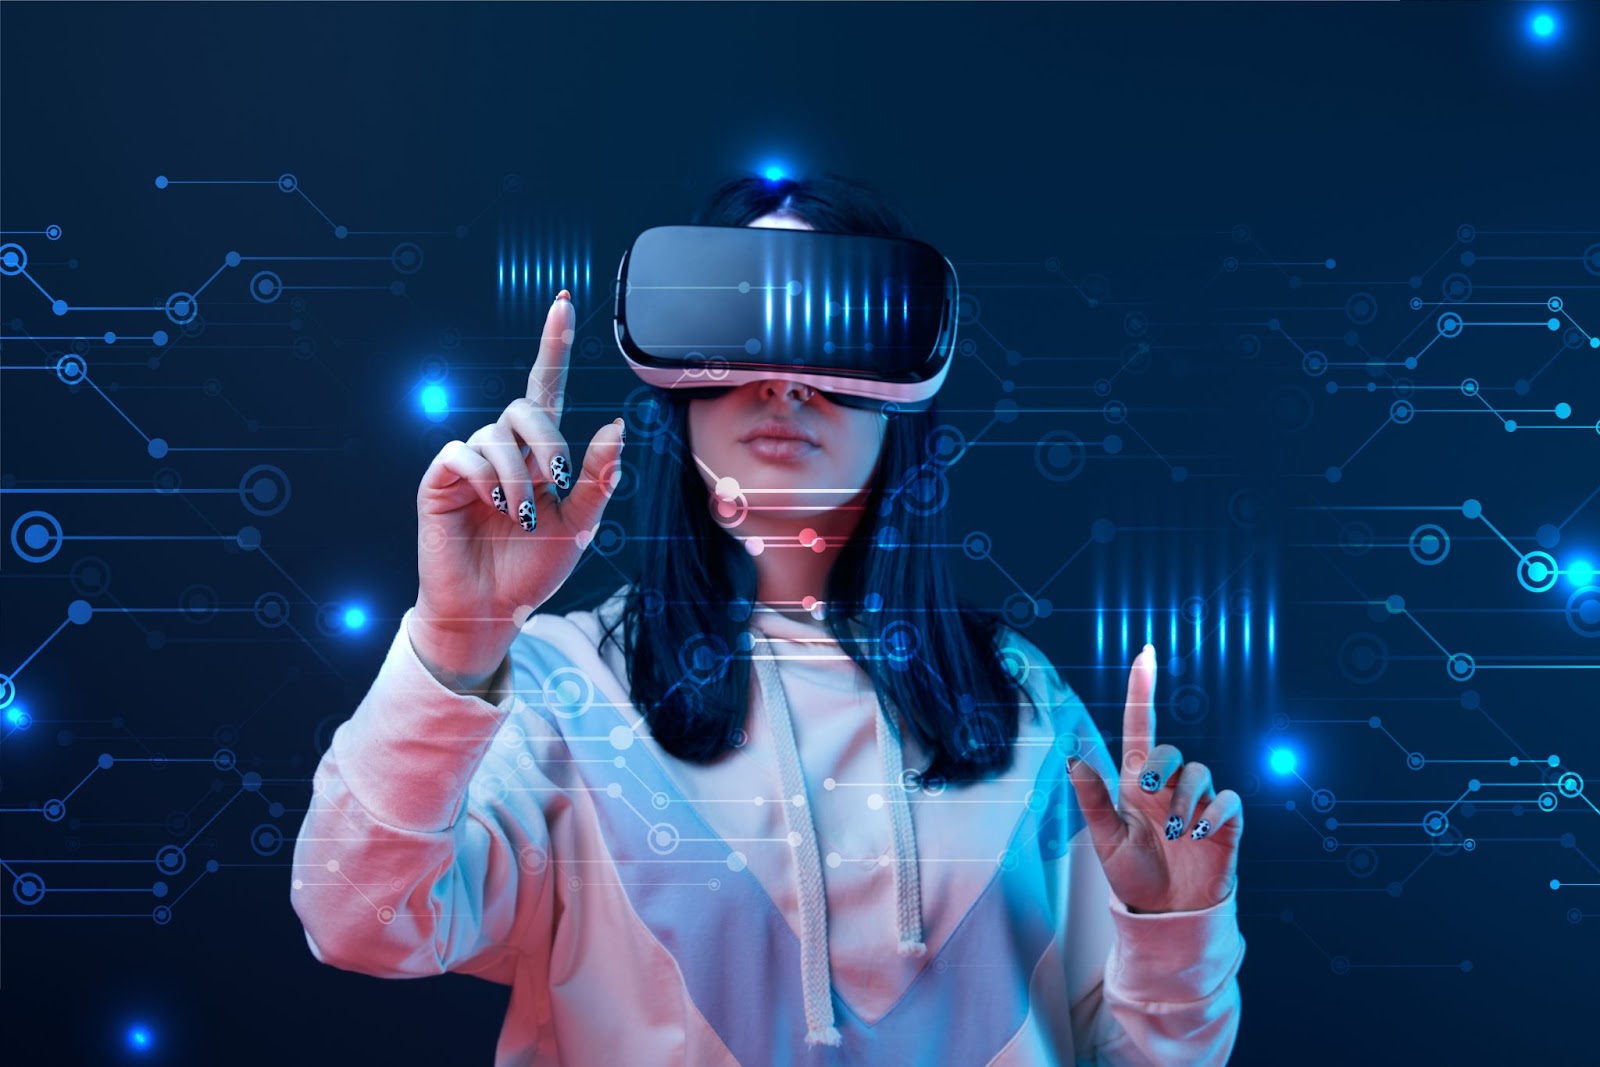 VR Technology to Reinvent Social Media Experience